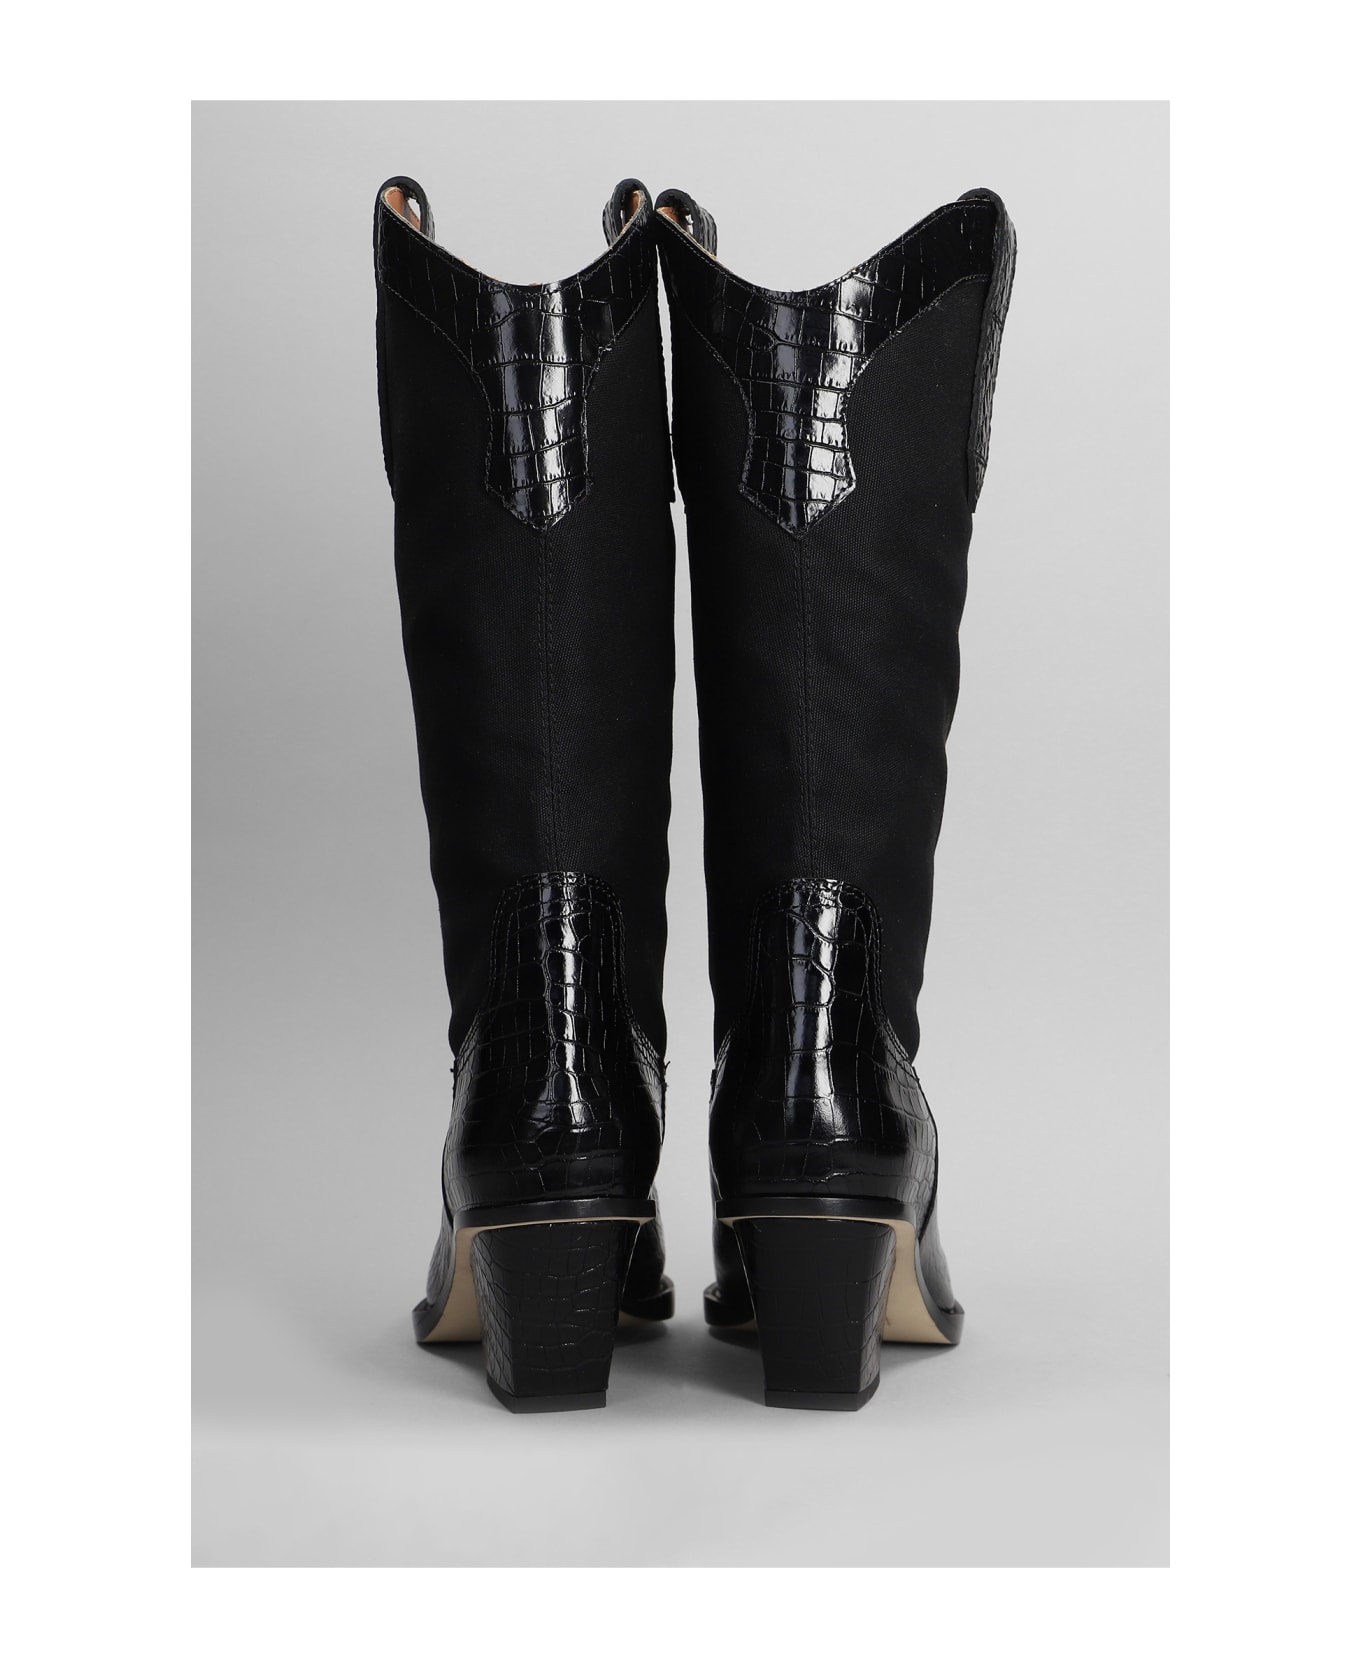 Paris Texas Rosario Texan Boots In Black Leather And Fabric - black ブーツ